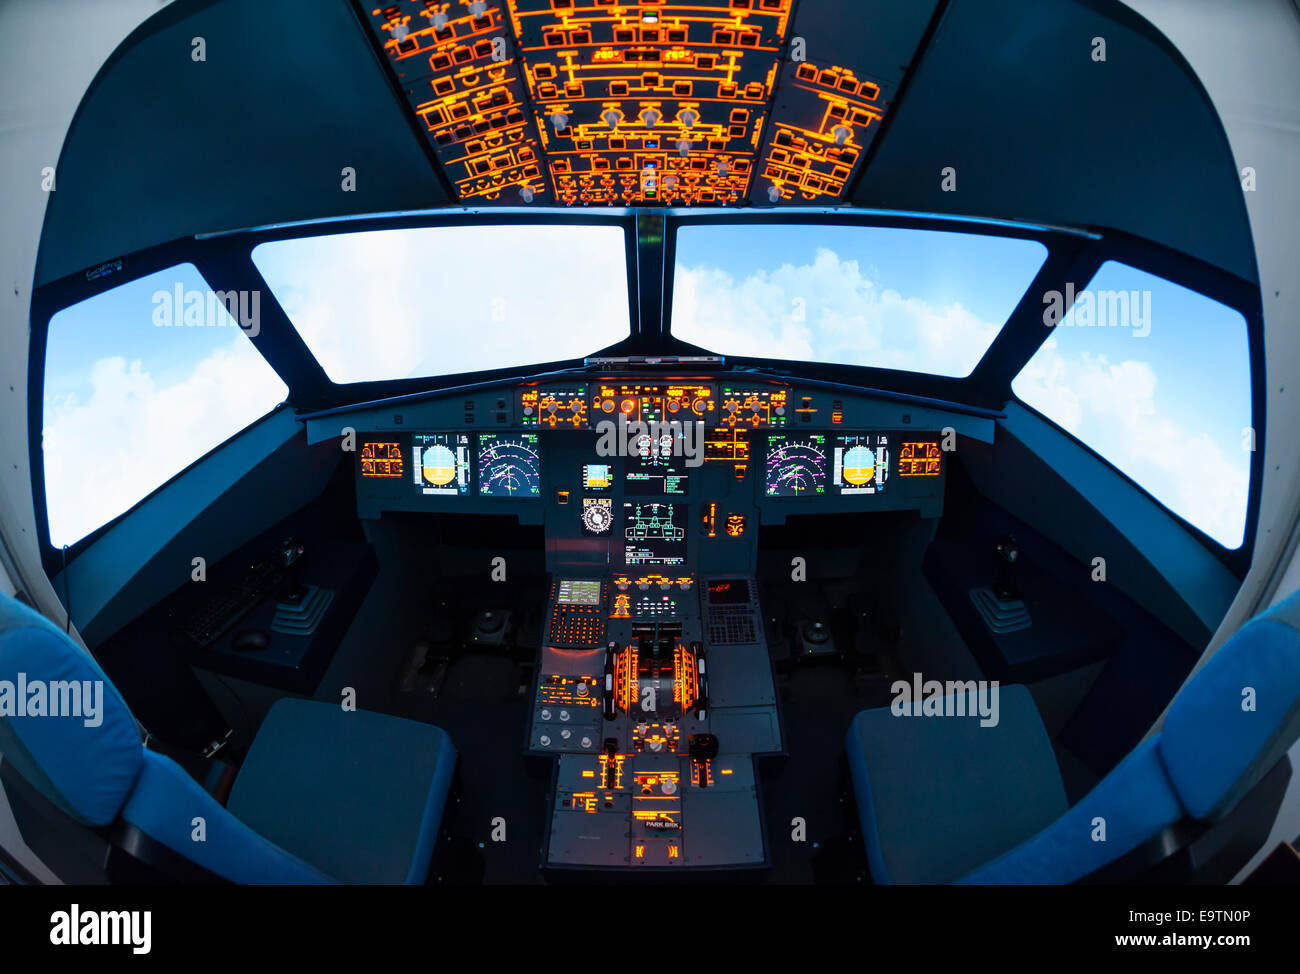 Cockpit of an Airbus A320 flight simulator that is used for training of professional airline pilots (fisheye lens distortion) Stock Photo